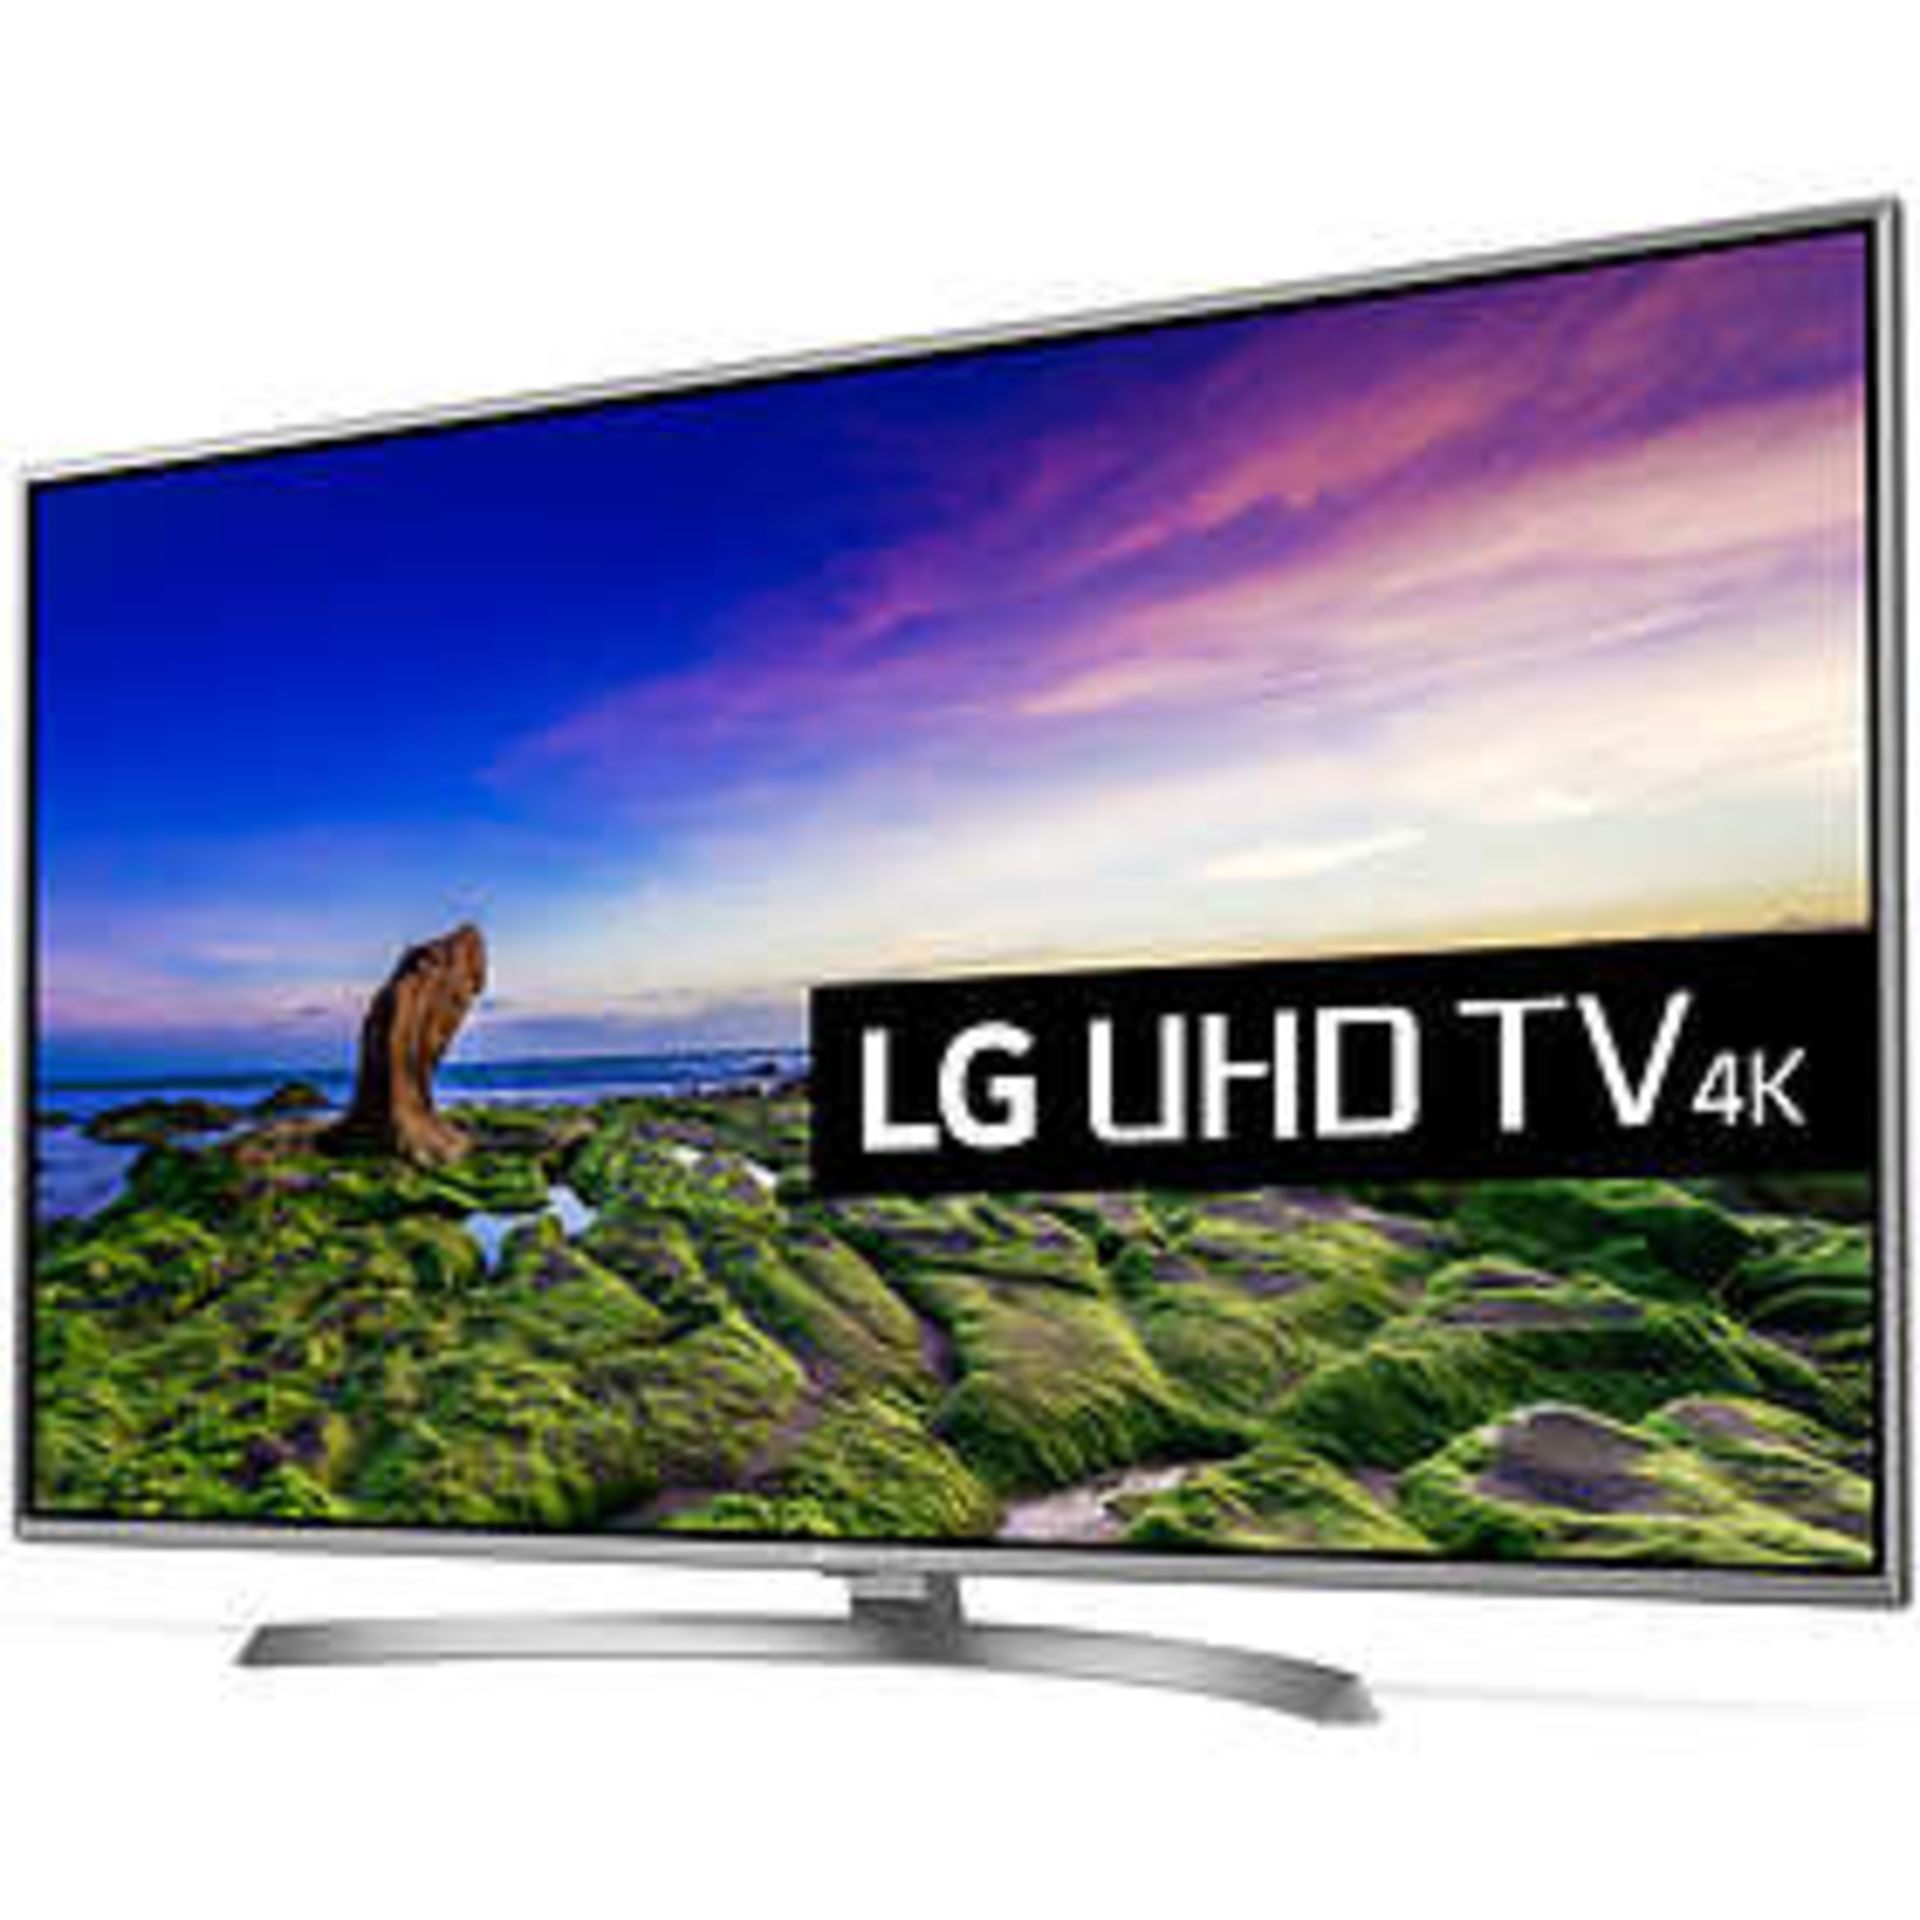 V Grade A LG 70 Inch ACTIVE HDR 4K ULTRA HD LED SMART TV WITH FREEVIEW HD & WEBOS 3.0 & WIFI - ULTRA